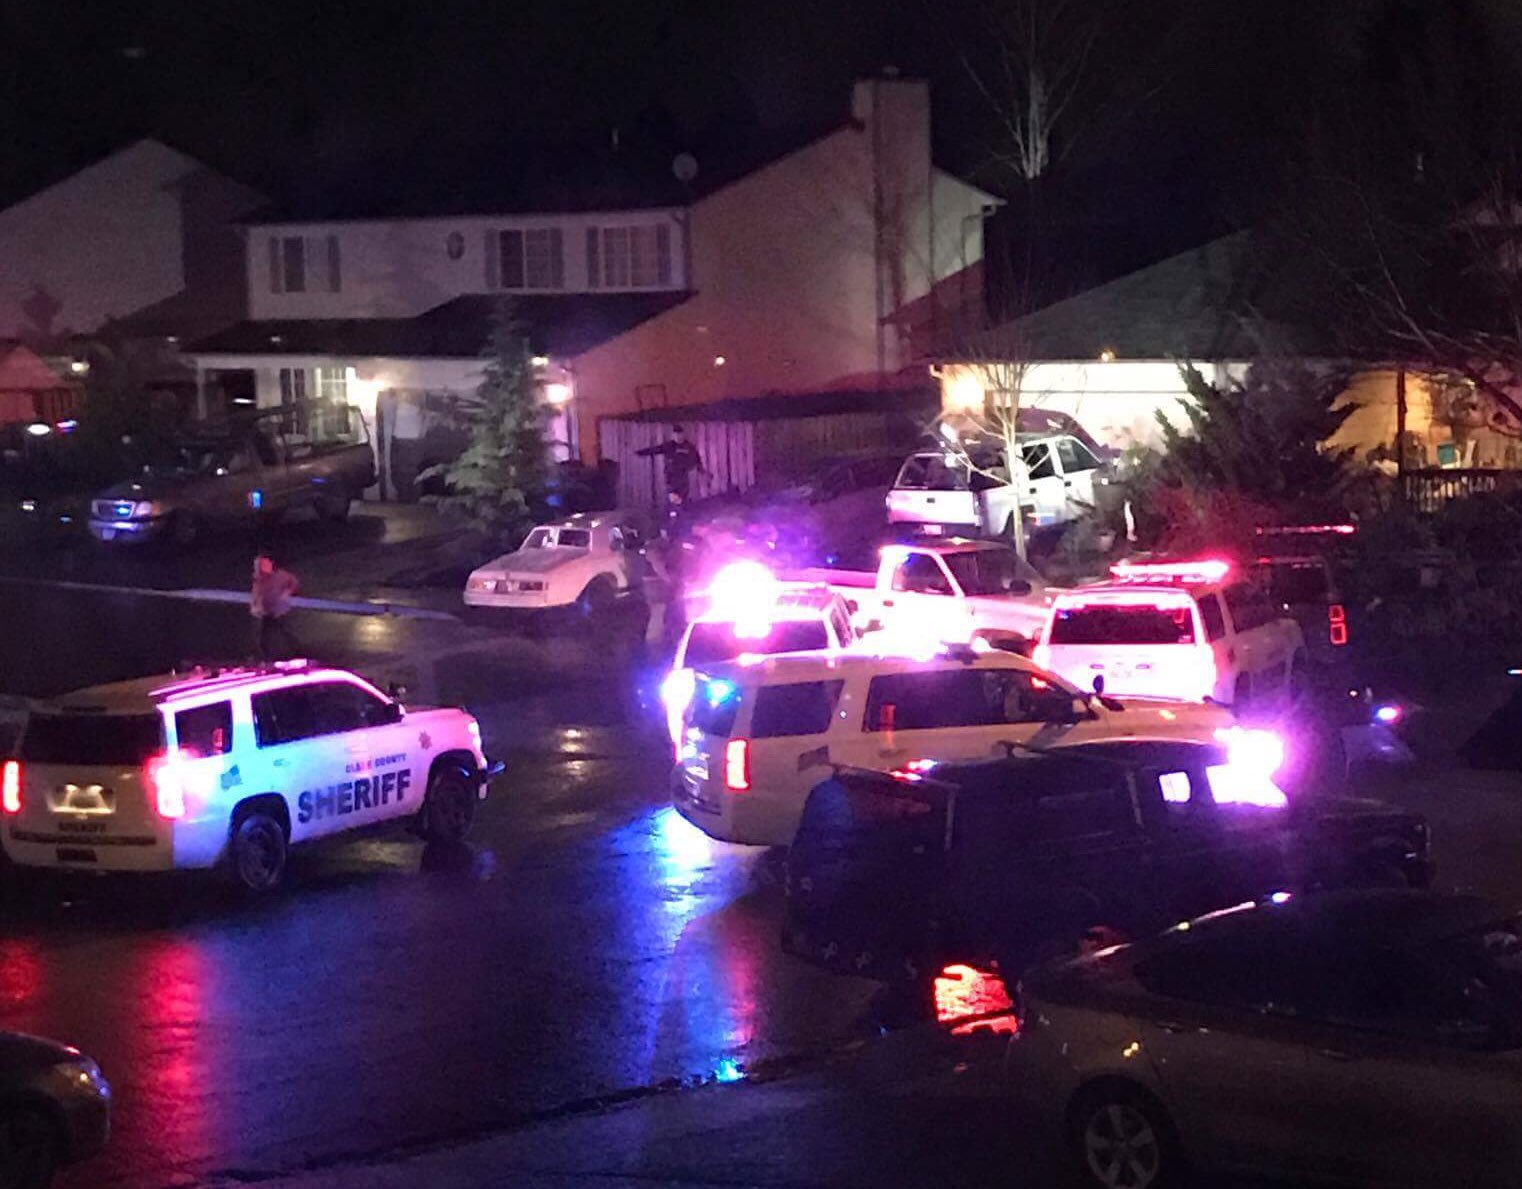 Law enforcement officials respond Thursday evening to the 13400 block of Northeast 97th Street, in the Orchards area, following a report of a man behaving erratically. The man was taken into custody after about an hour and an ample police response, according to emergency radio traffic monitored at The Columbian.